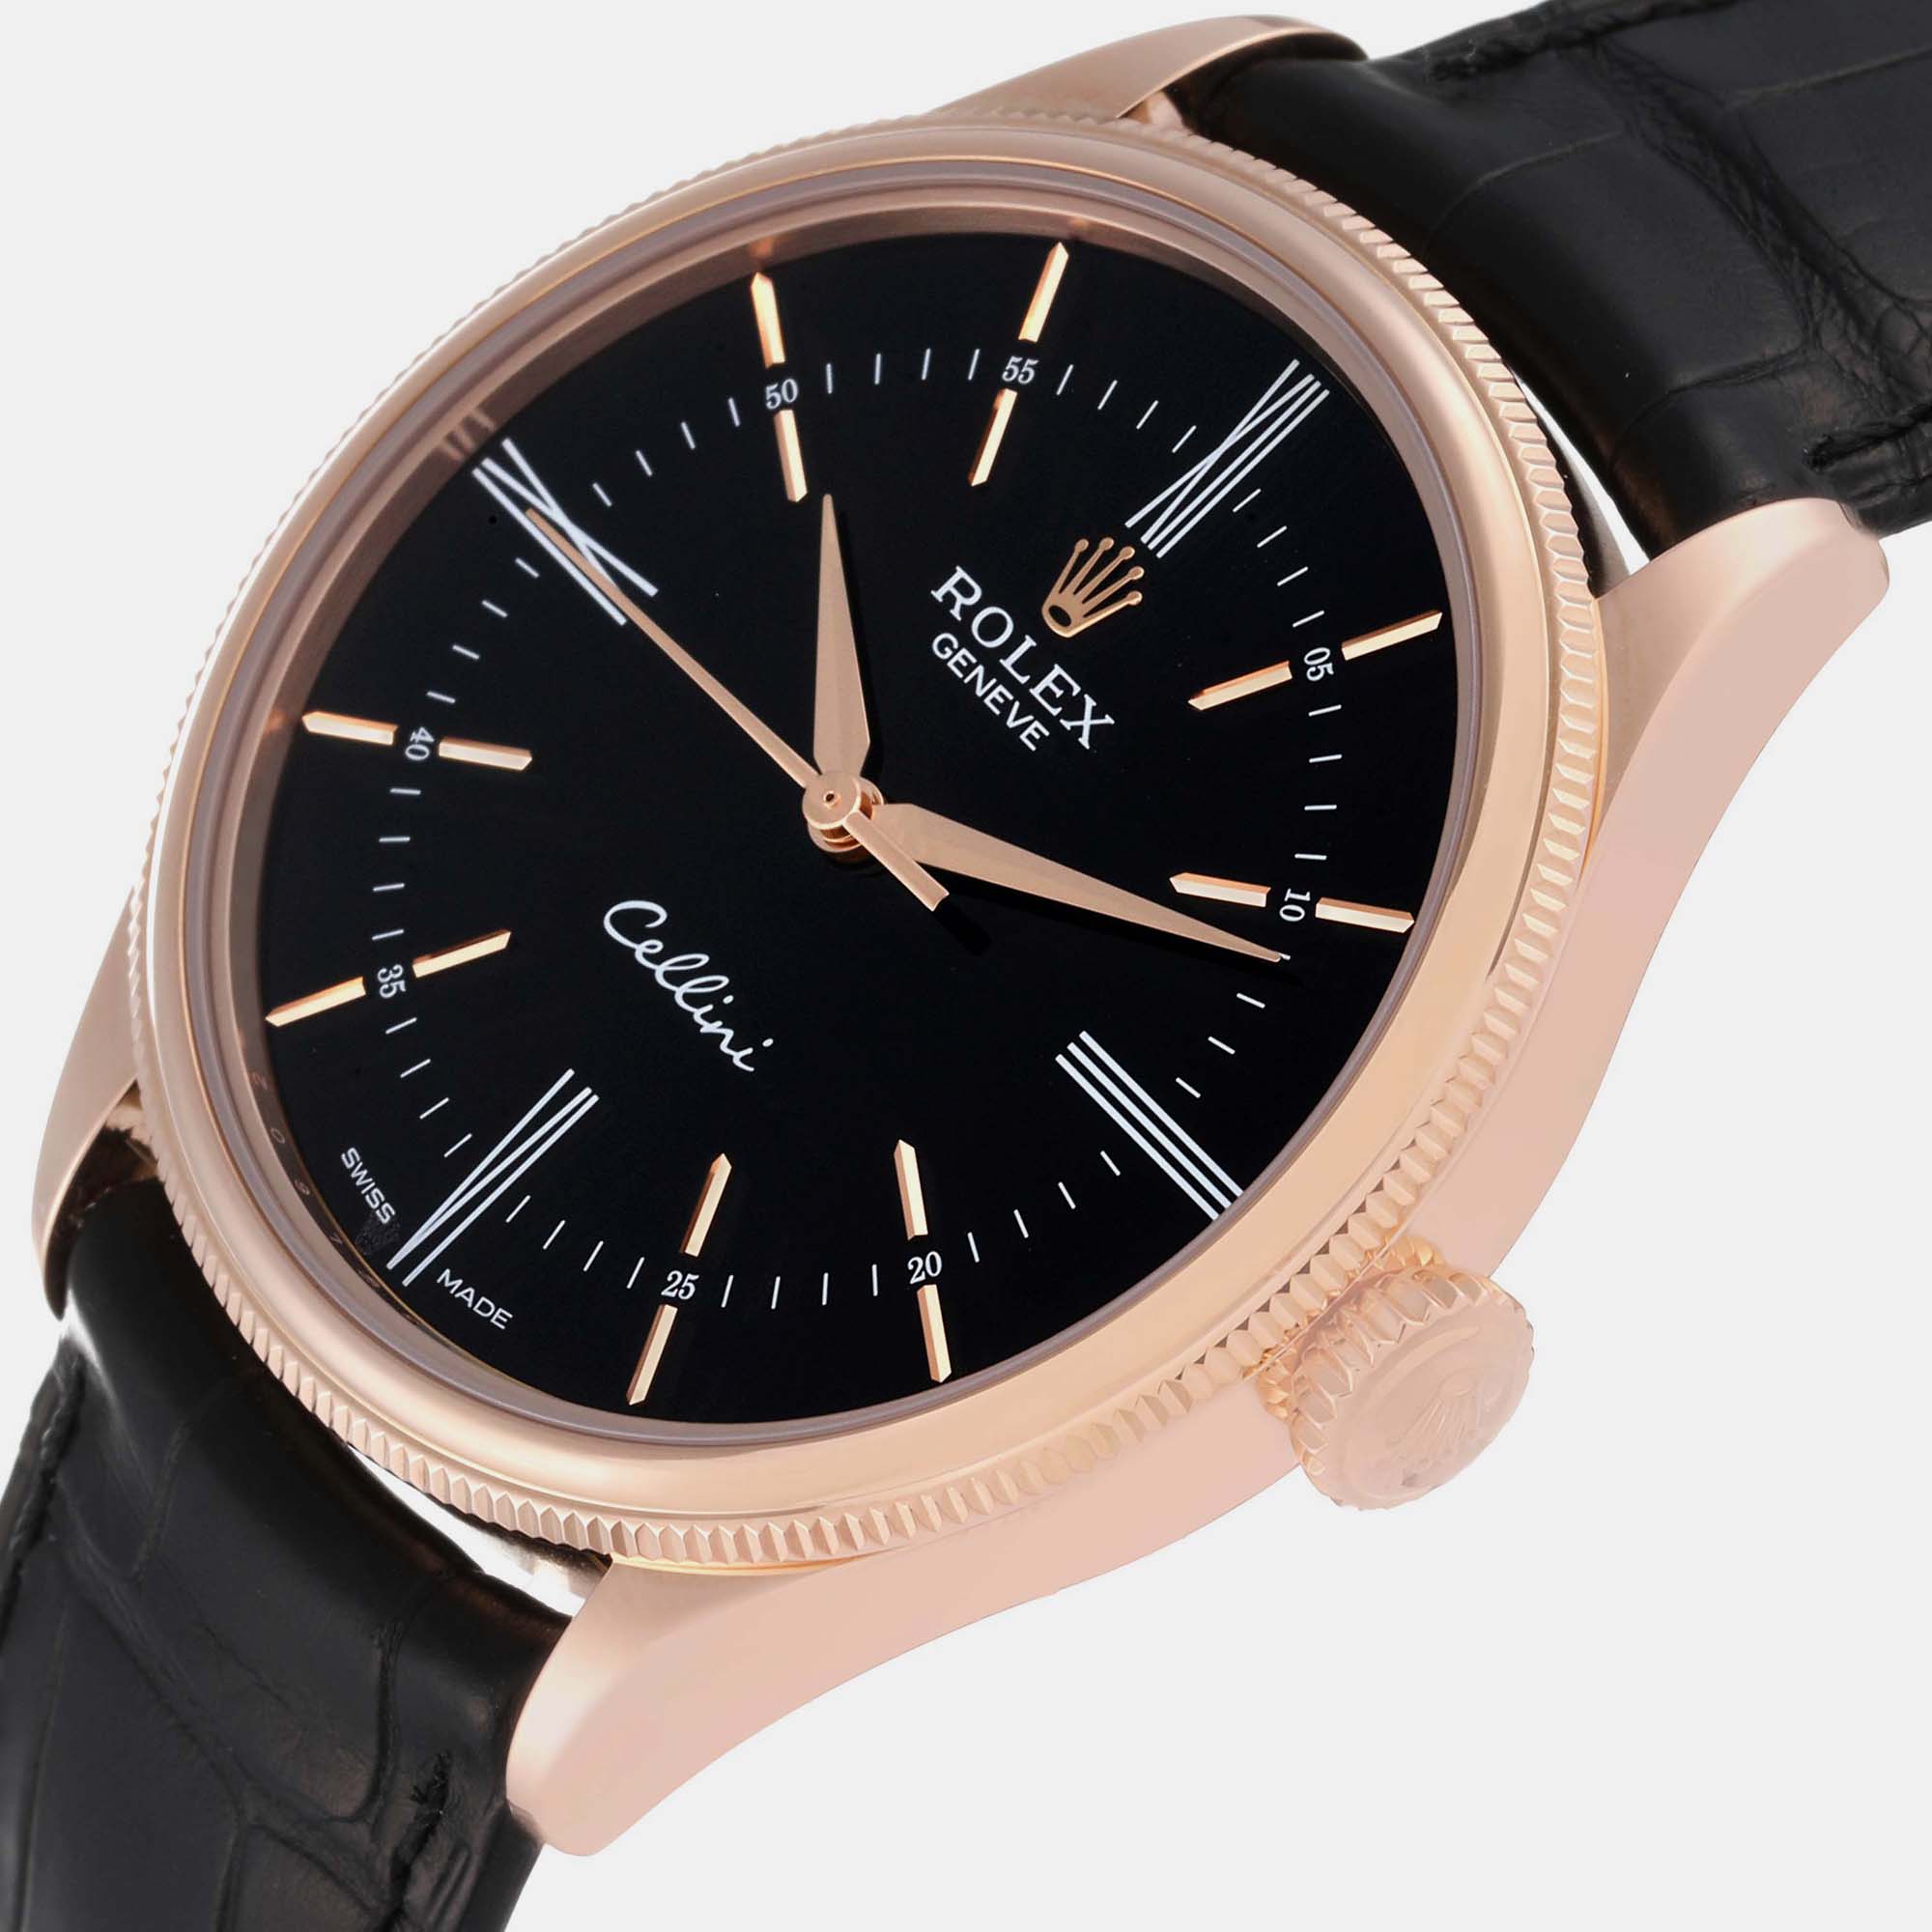 

Rolex Cellini Time Rose Gold Black Dial Mens Watch 50505 39 mm